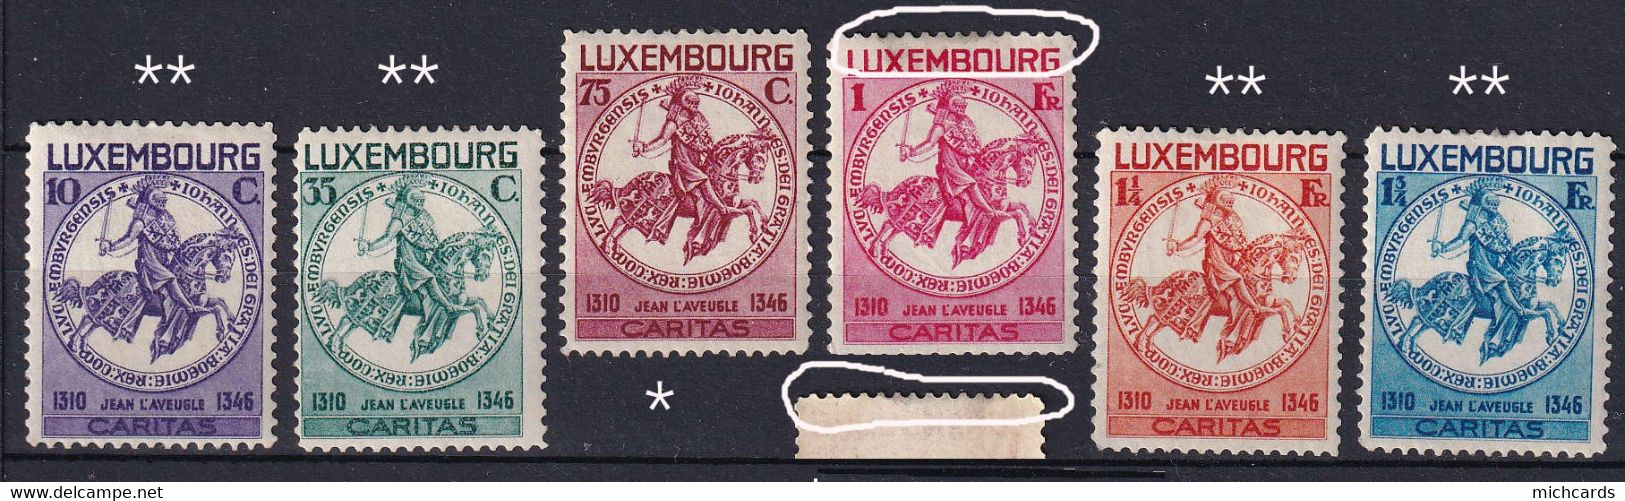 245 LUXEMBOURG 1934 - Y&T 252/53 Et 256/57 Neuf ** MNH - 254/55 Neuf * MLH - Caritas Cheval - 1926-39 Charlotte Rechtsprofil